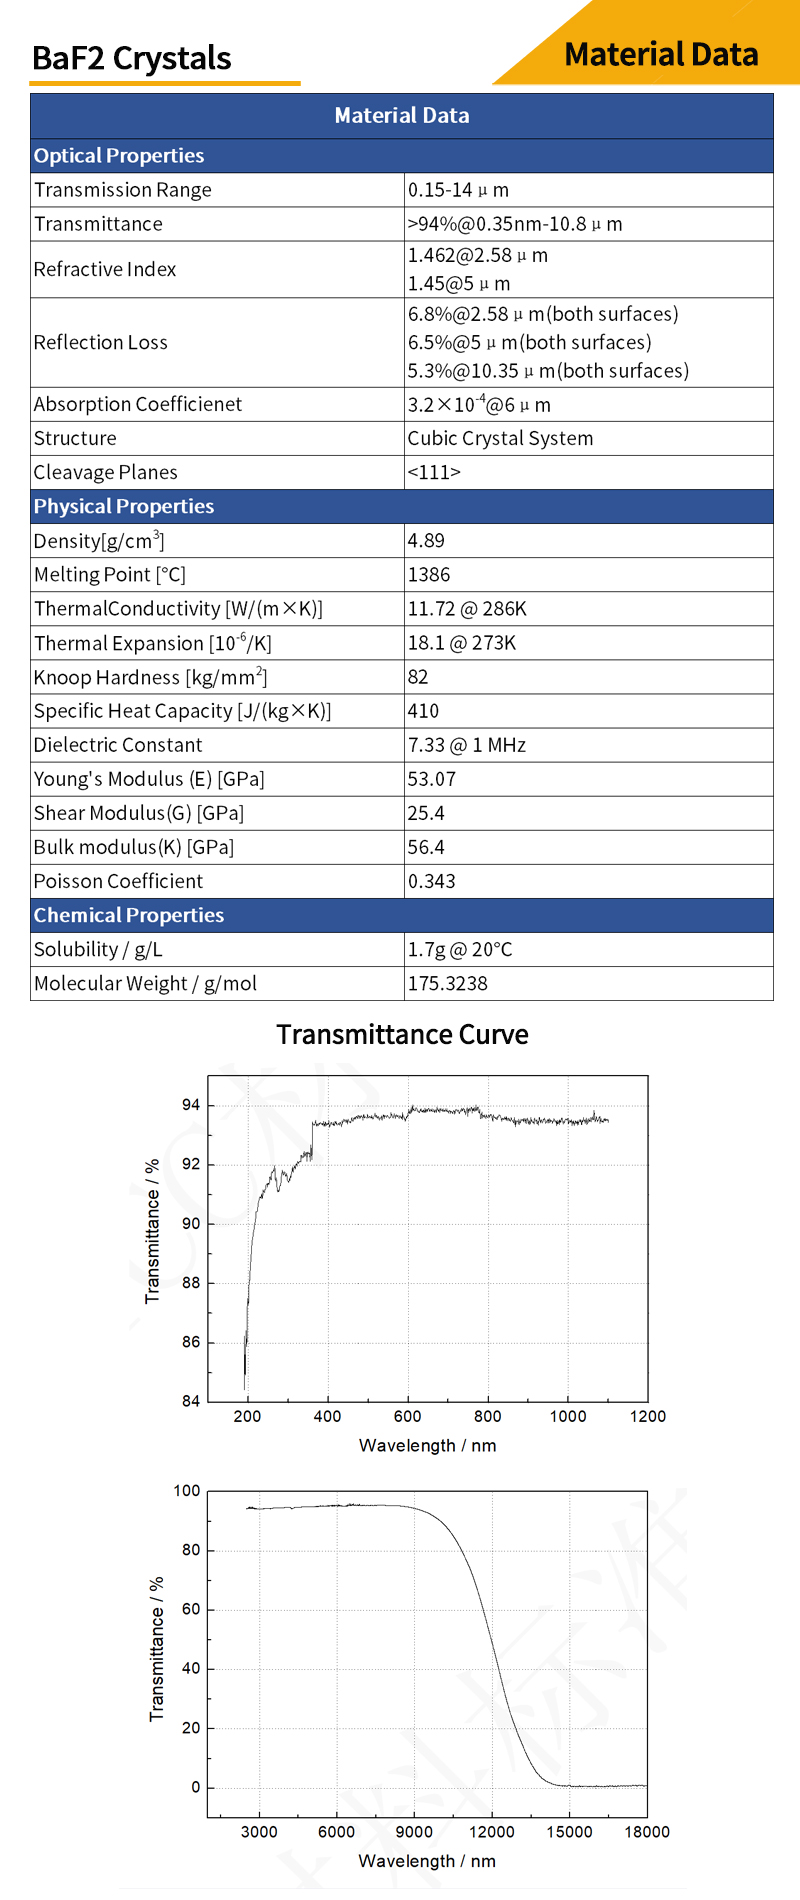 Infrared  barium fluoride material data and transmittance curves